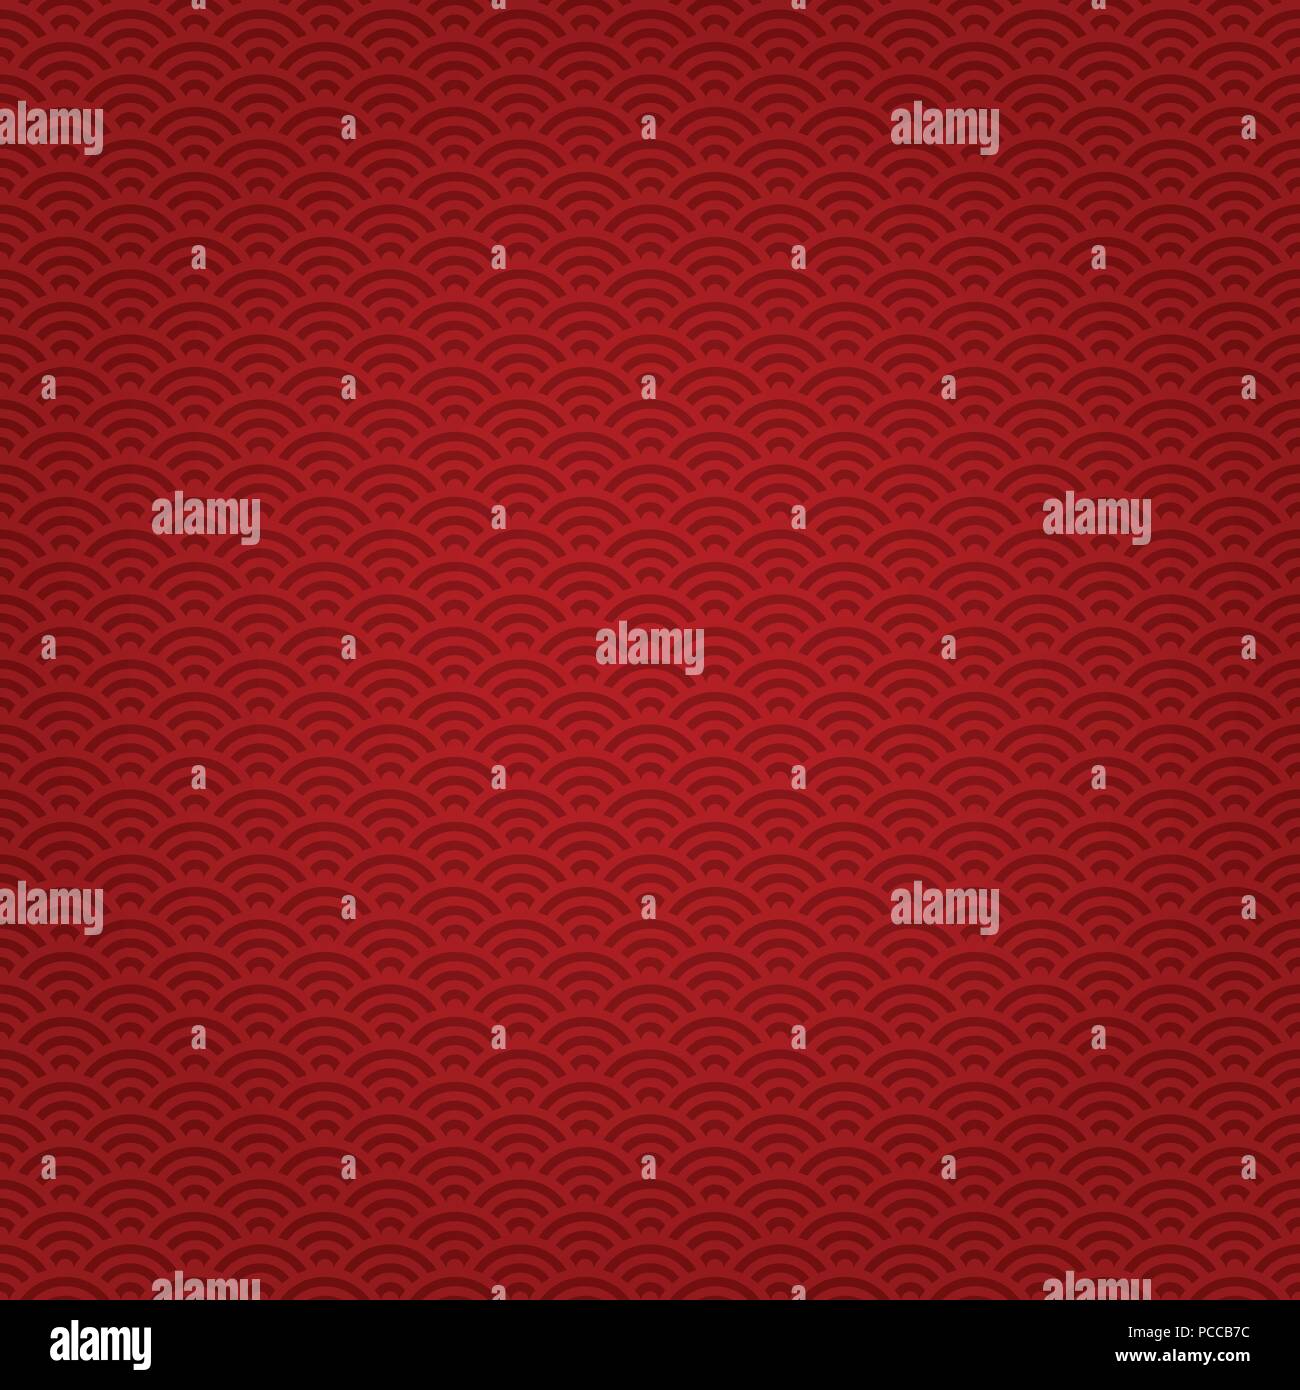 Chinese seamless pattern with red circles. Vector illustration. Stock Vector